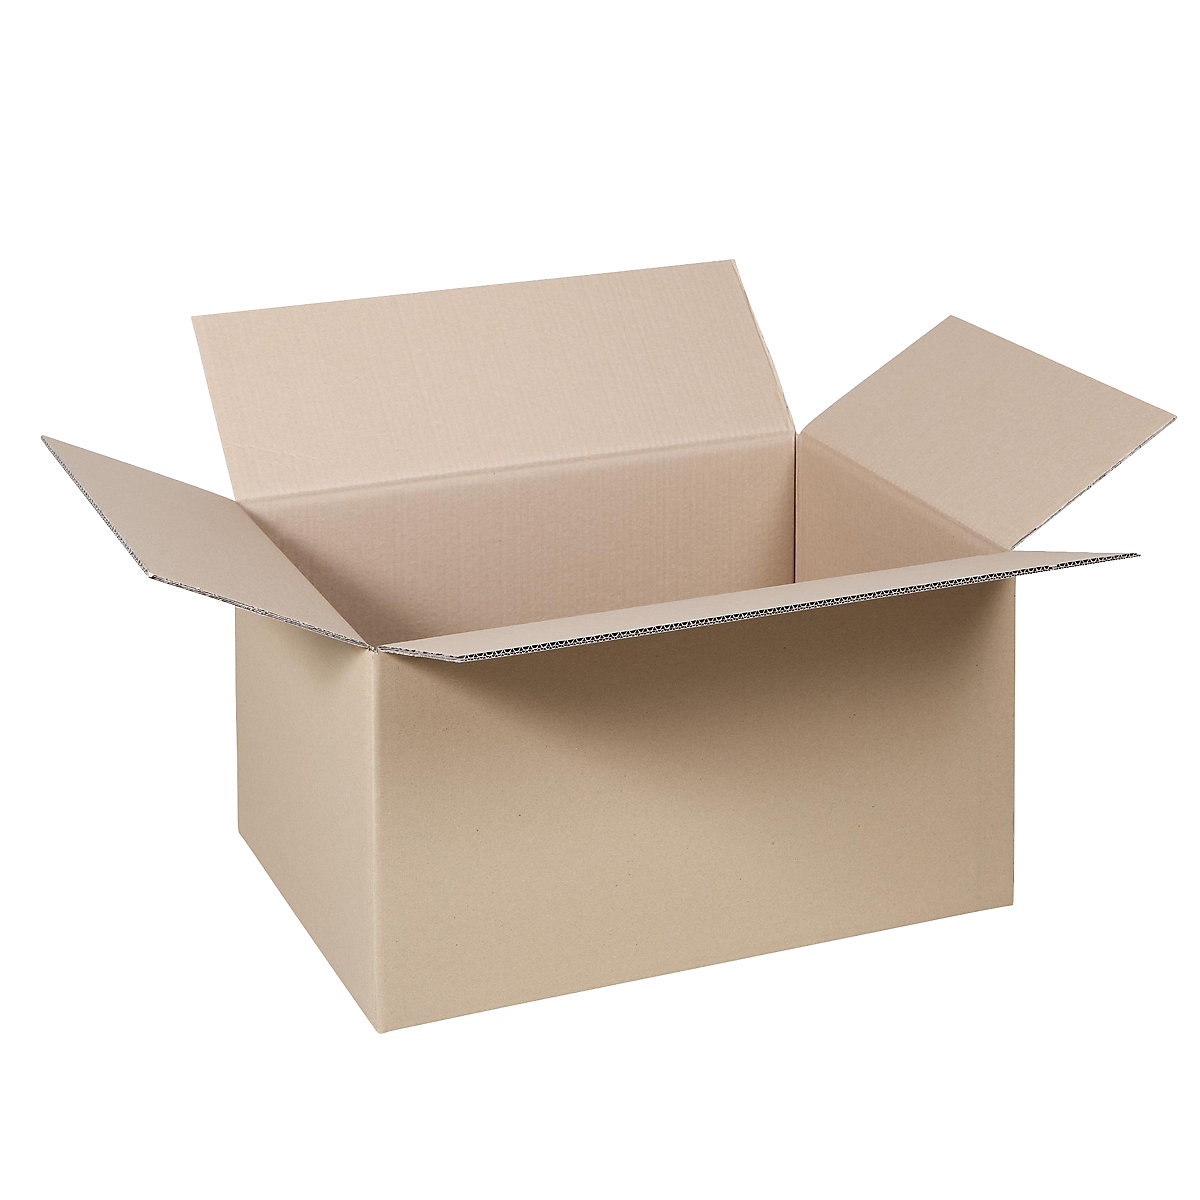 Folding cardboard box, FEFCO 0201, made of double fluted cardboard, internal dimensions 480 x 330 x 300 mm, 2.3 BC, pack of 100-4